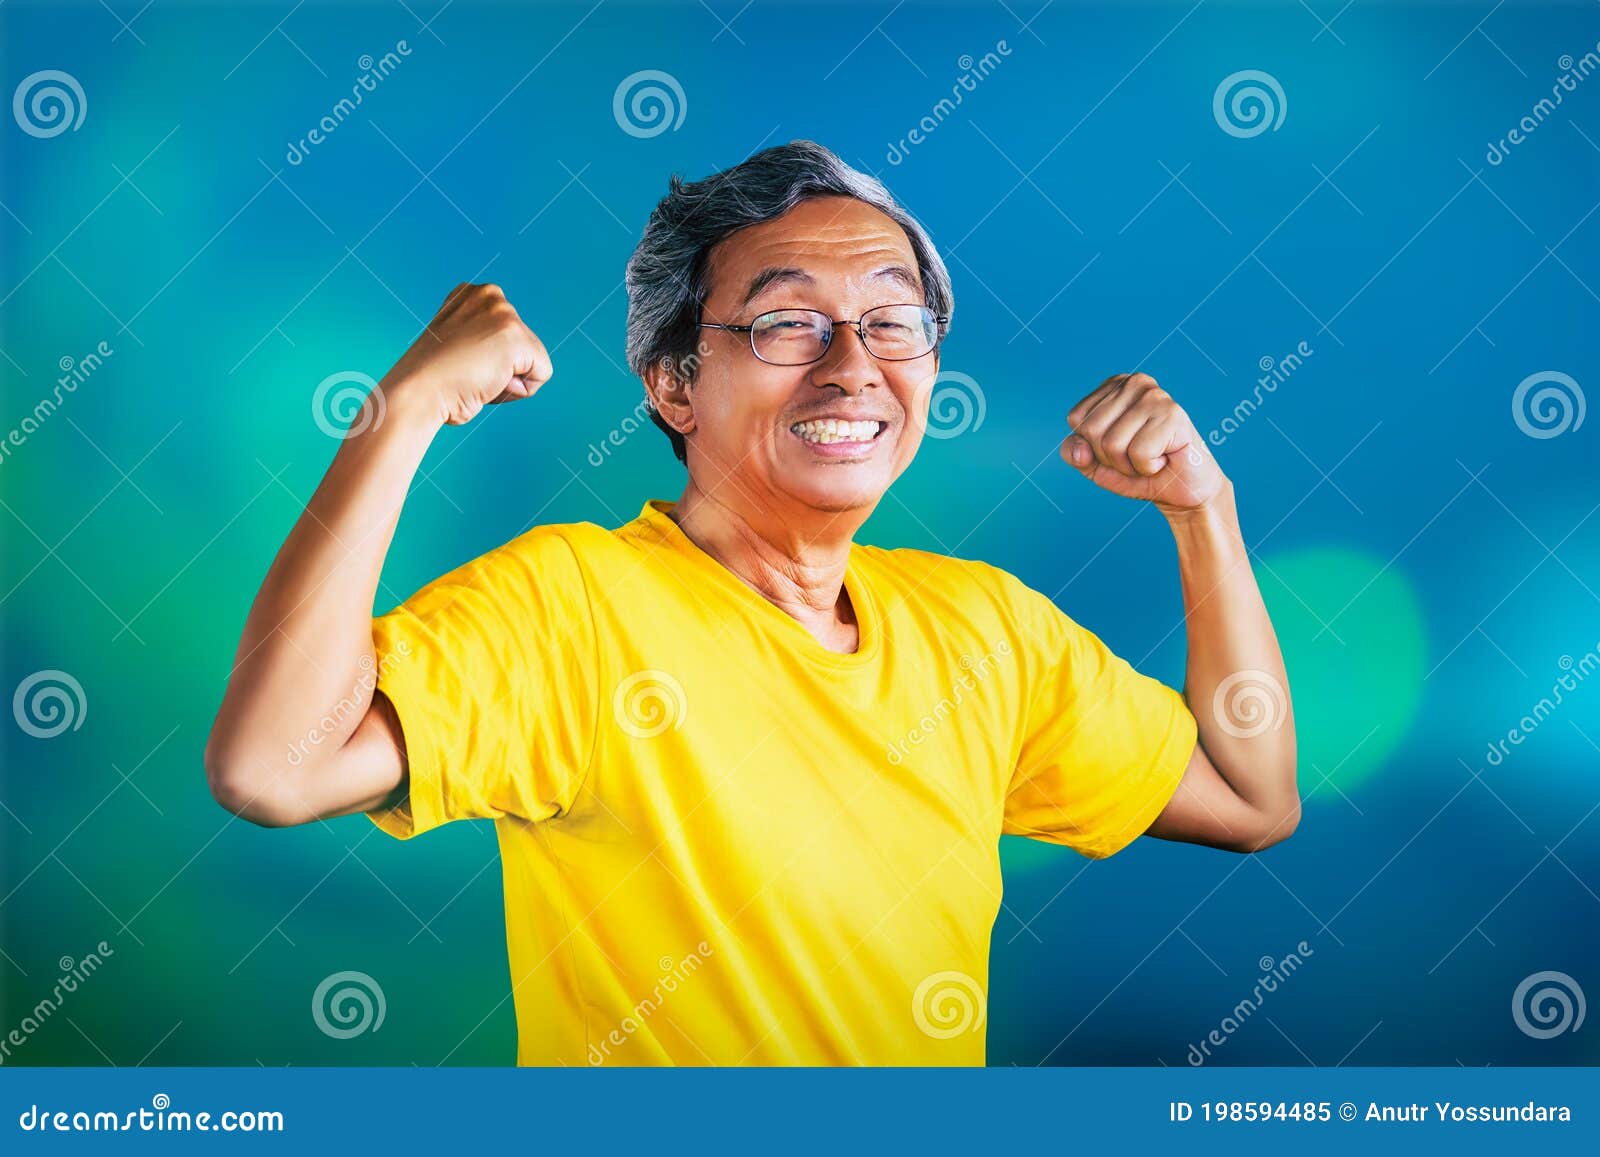 senior man showing off muscle for strong healthy lifestye concept on blue bokeh background